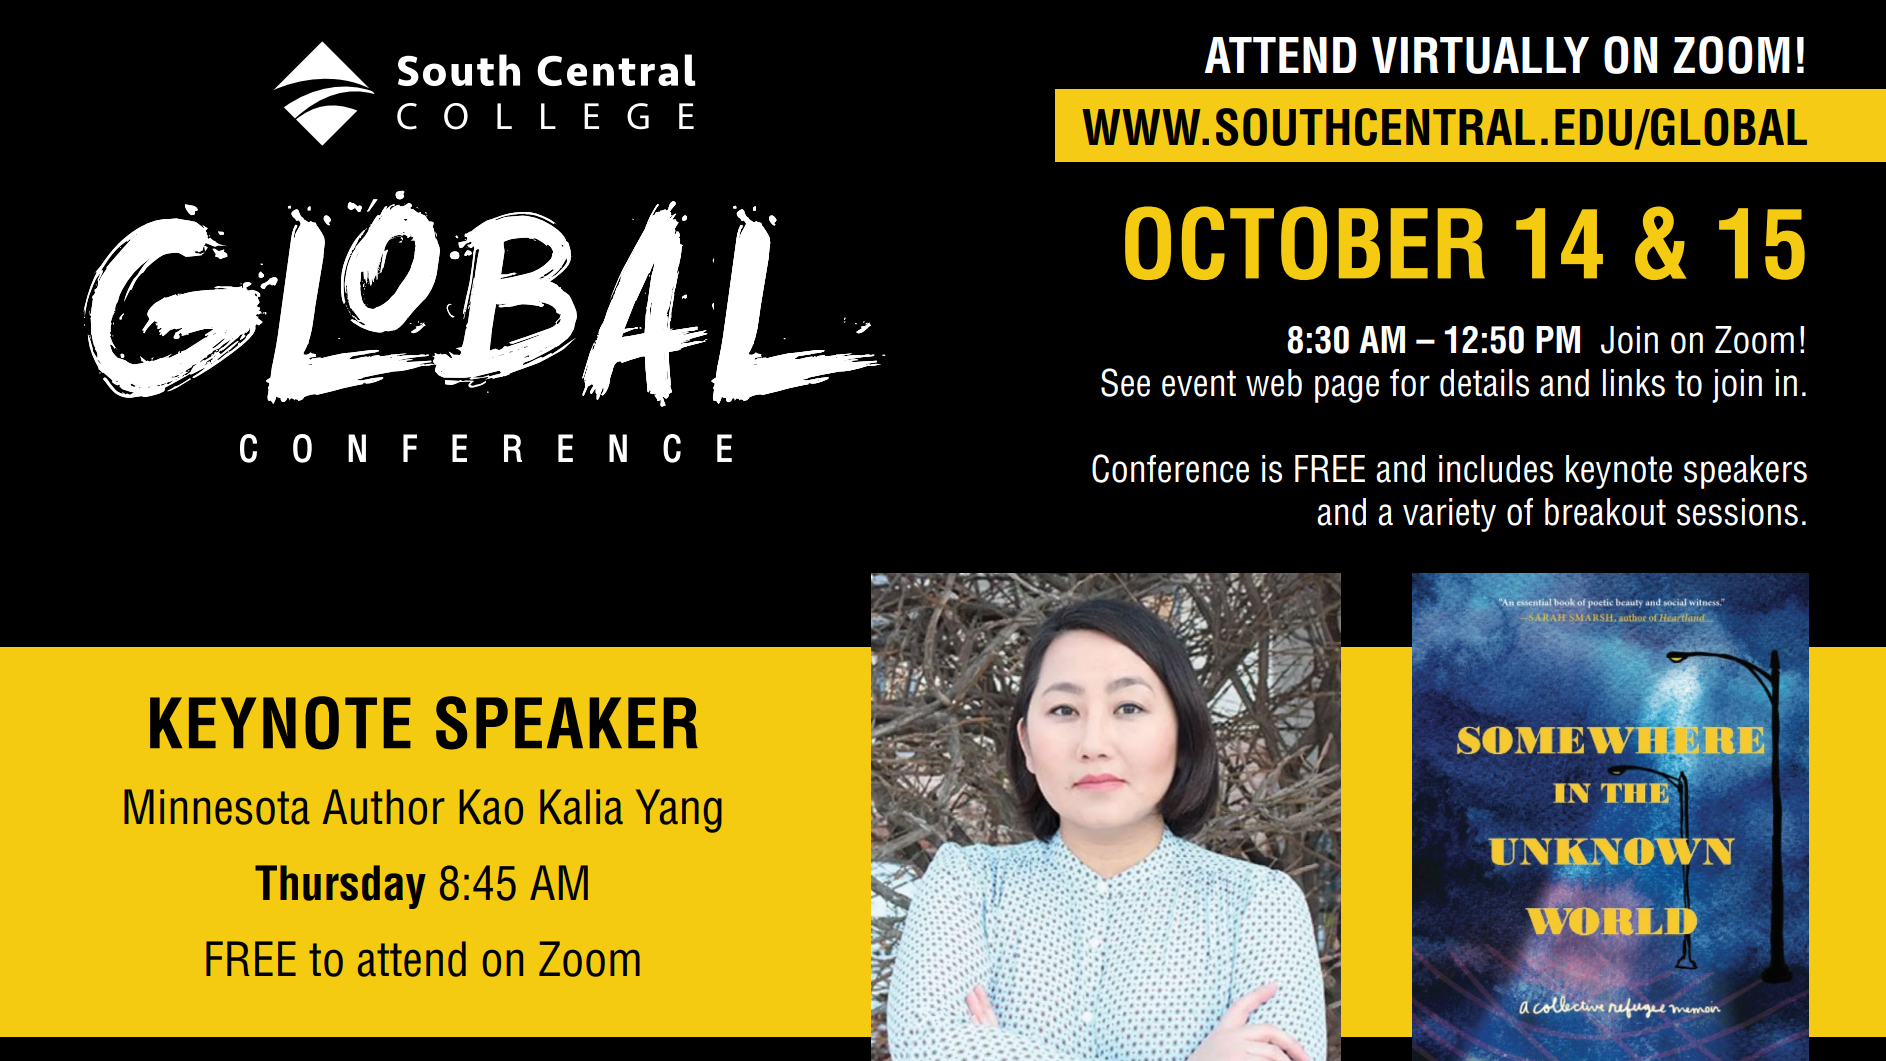 South Central College Global Conference. Attend virtually on Zoom! October 14 and 15. www.southcentral.edu/global